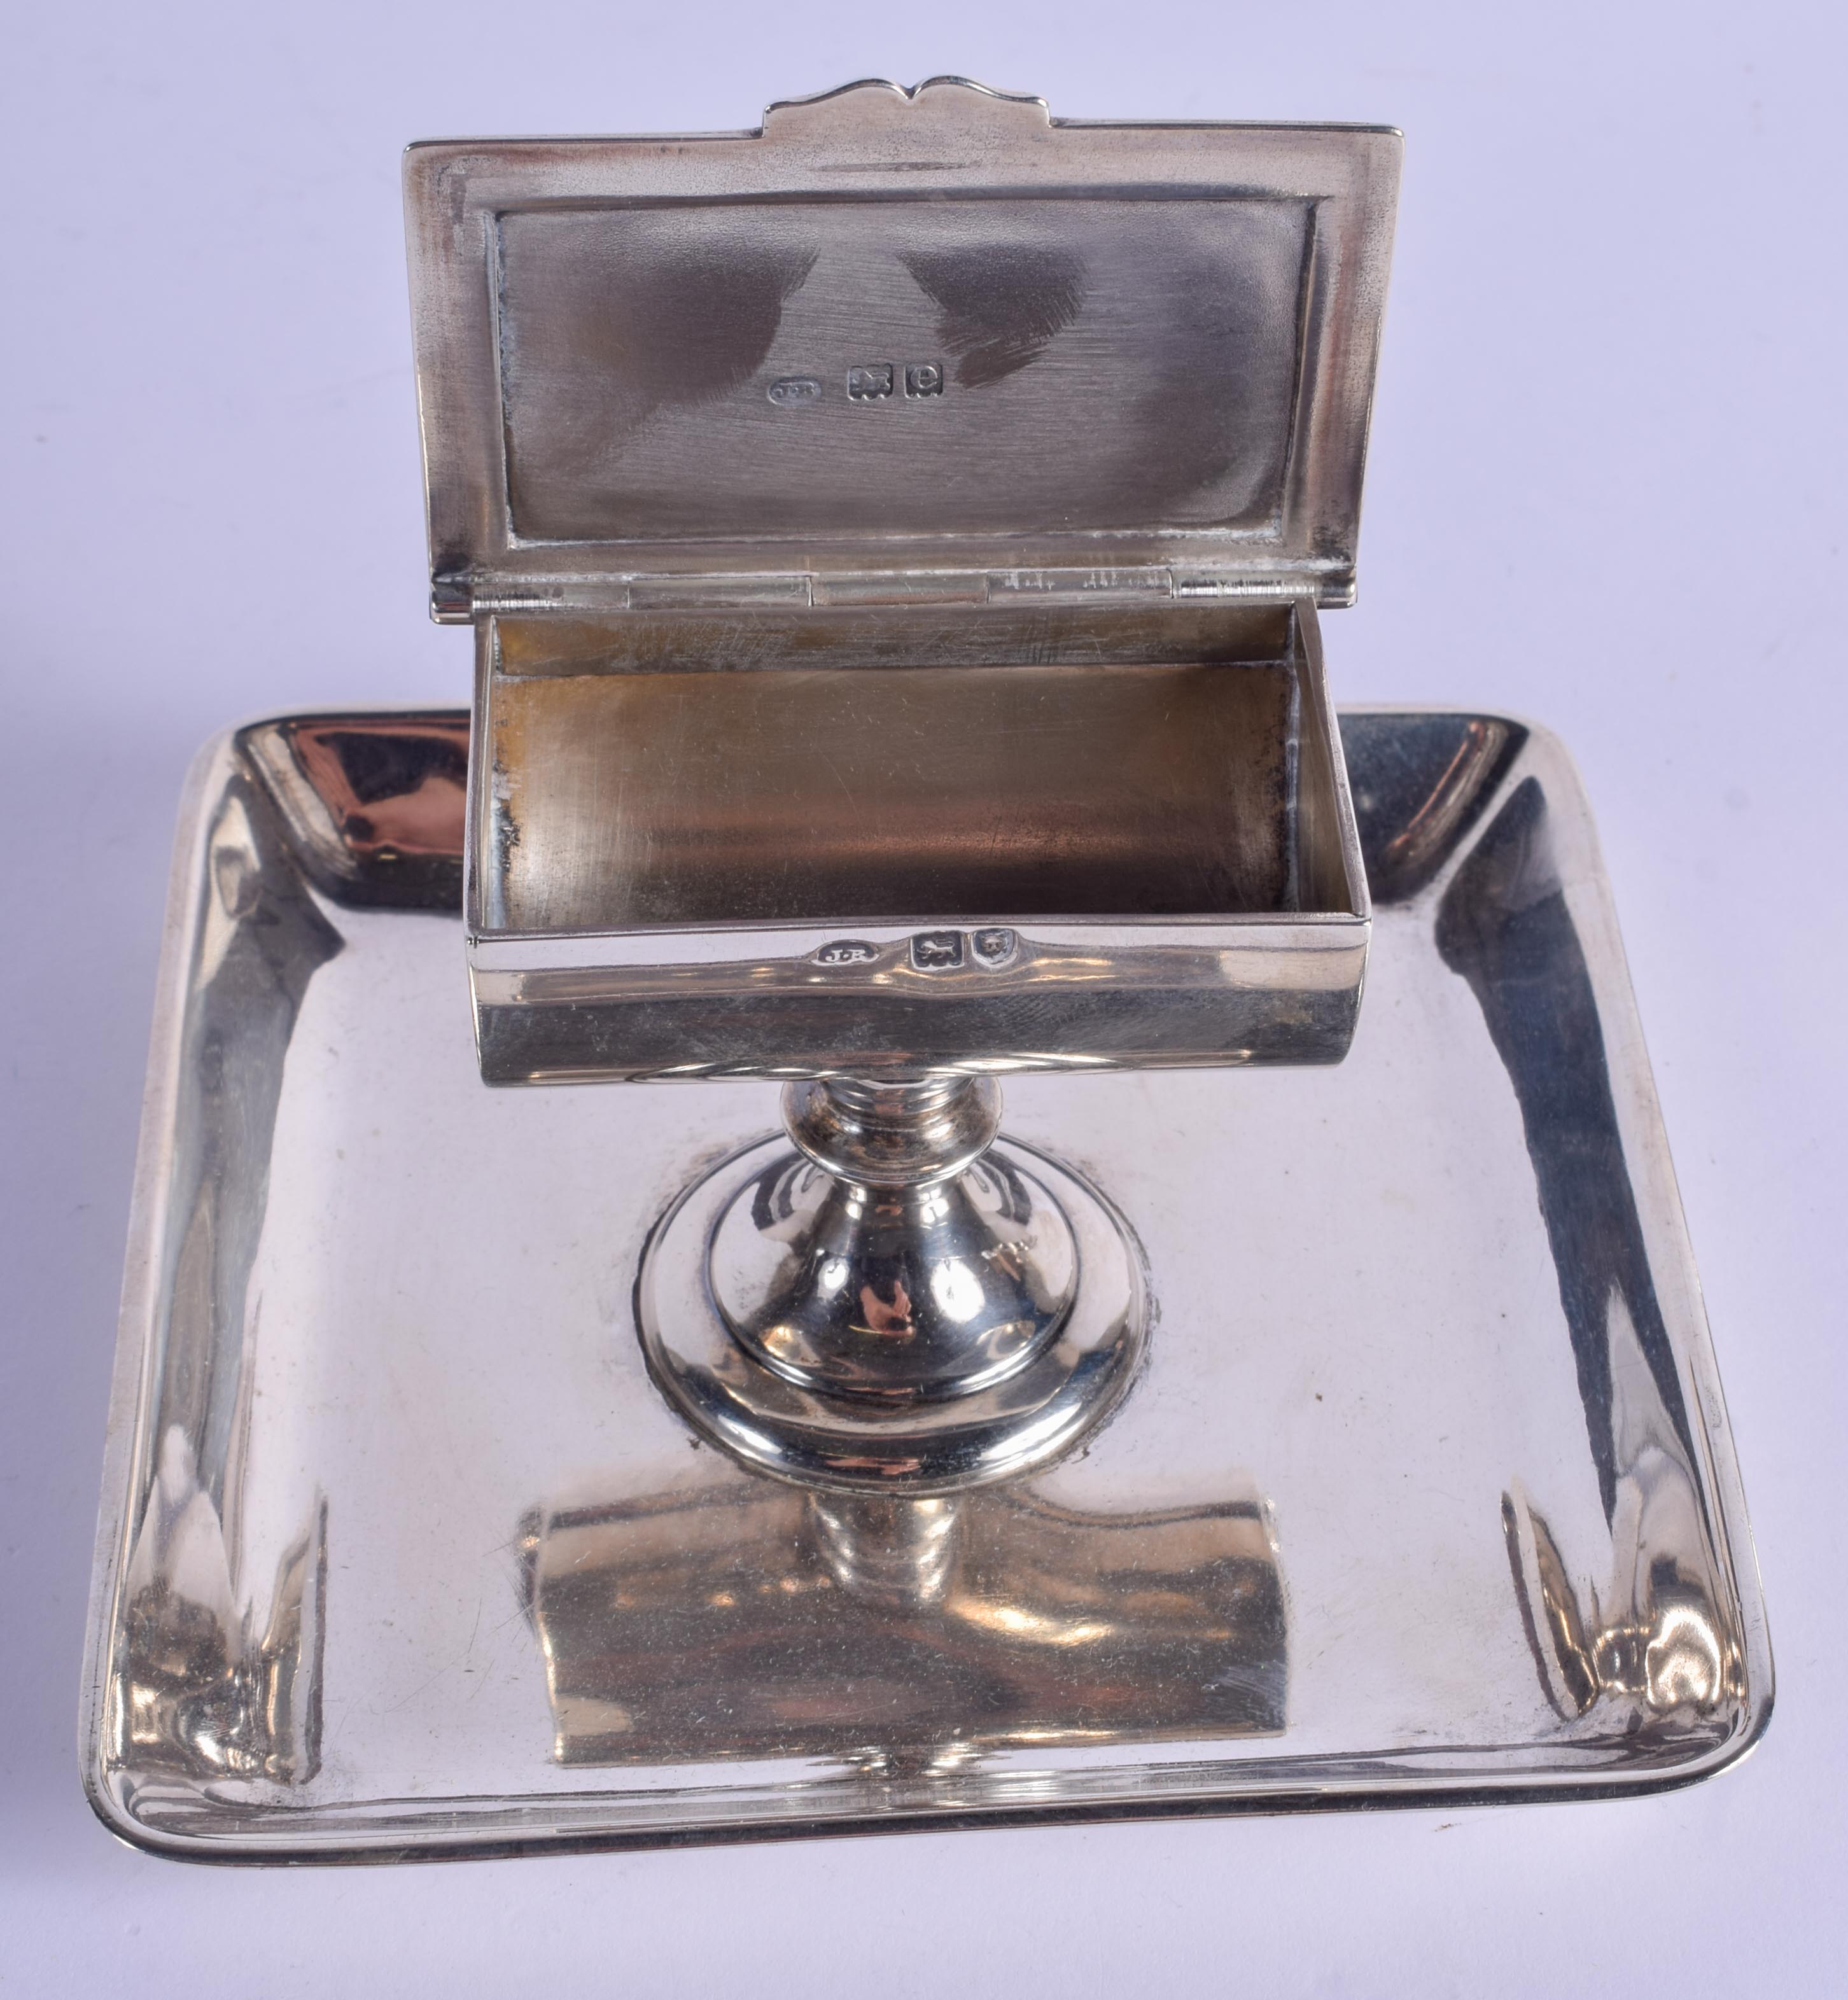 AN EDWARDIAN SILVER DESK STAND. London 1900. 264 grams. 11 cm square. - Image 3 of 5